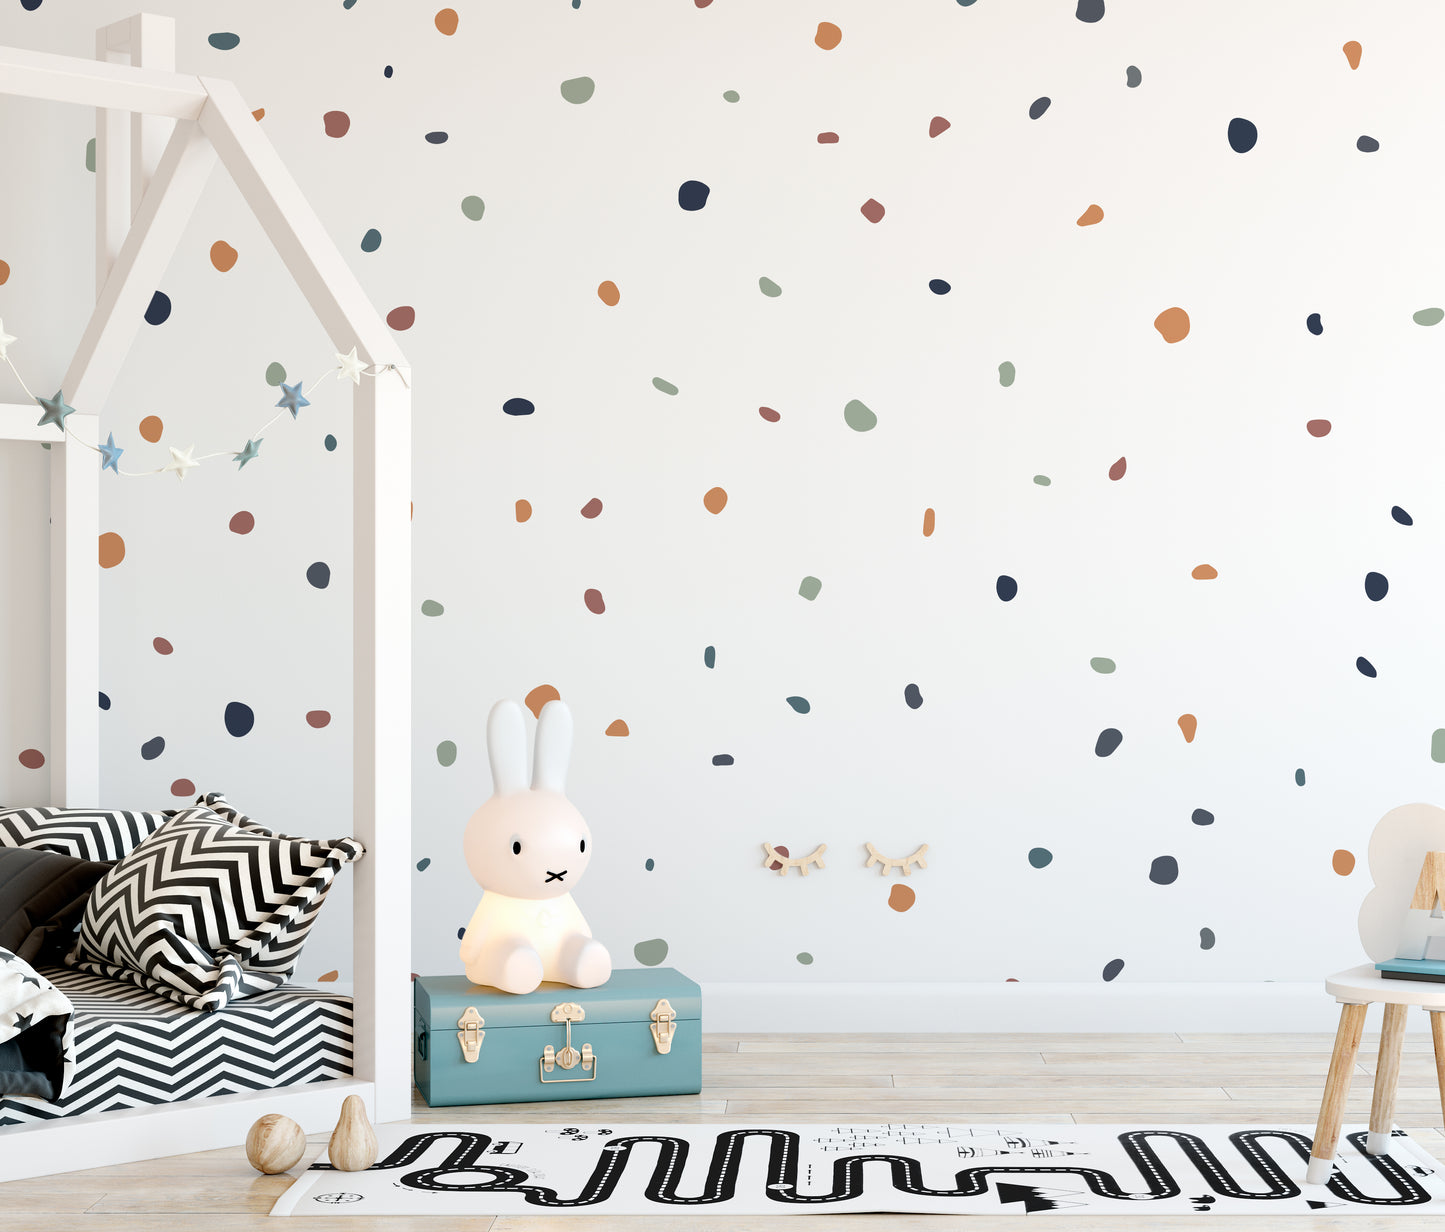 Boho Chic Polka Dot Wall Stickers Decals